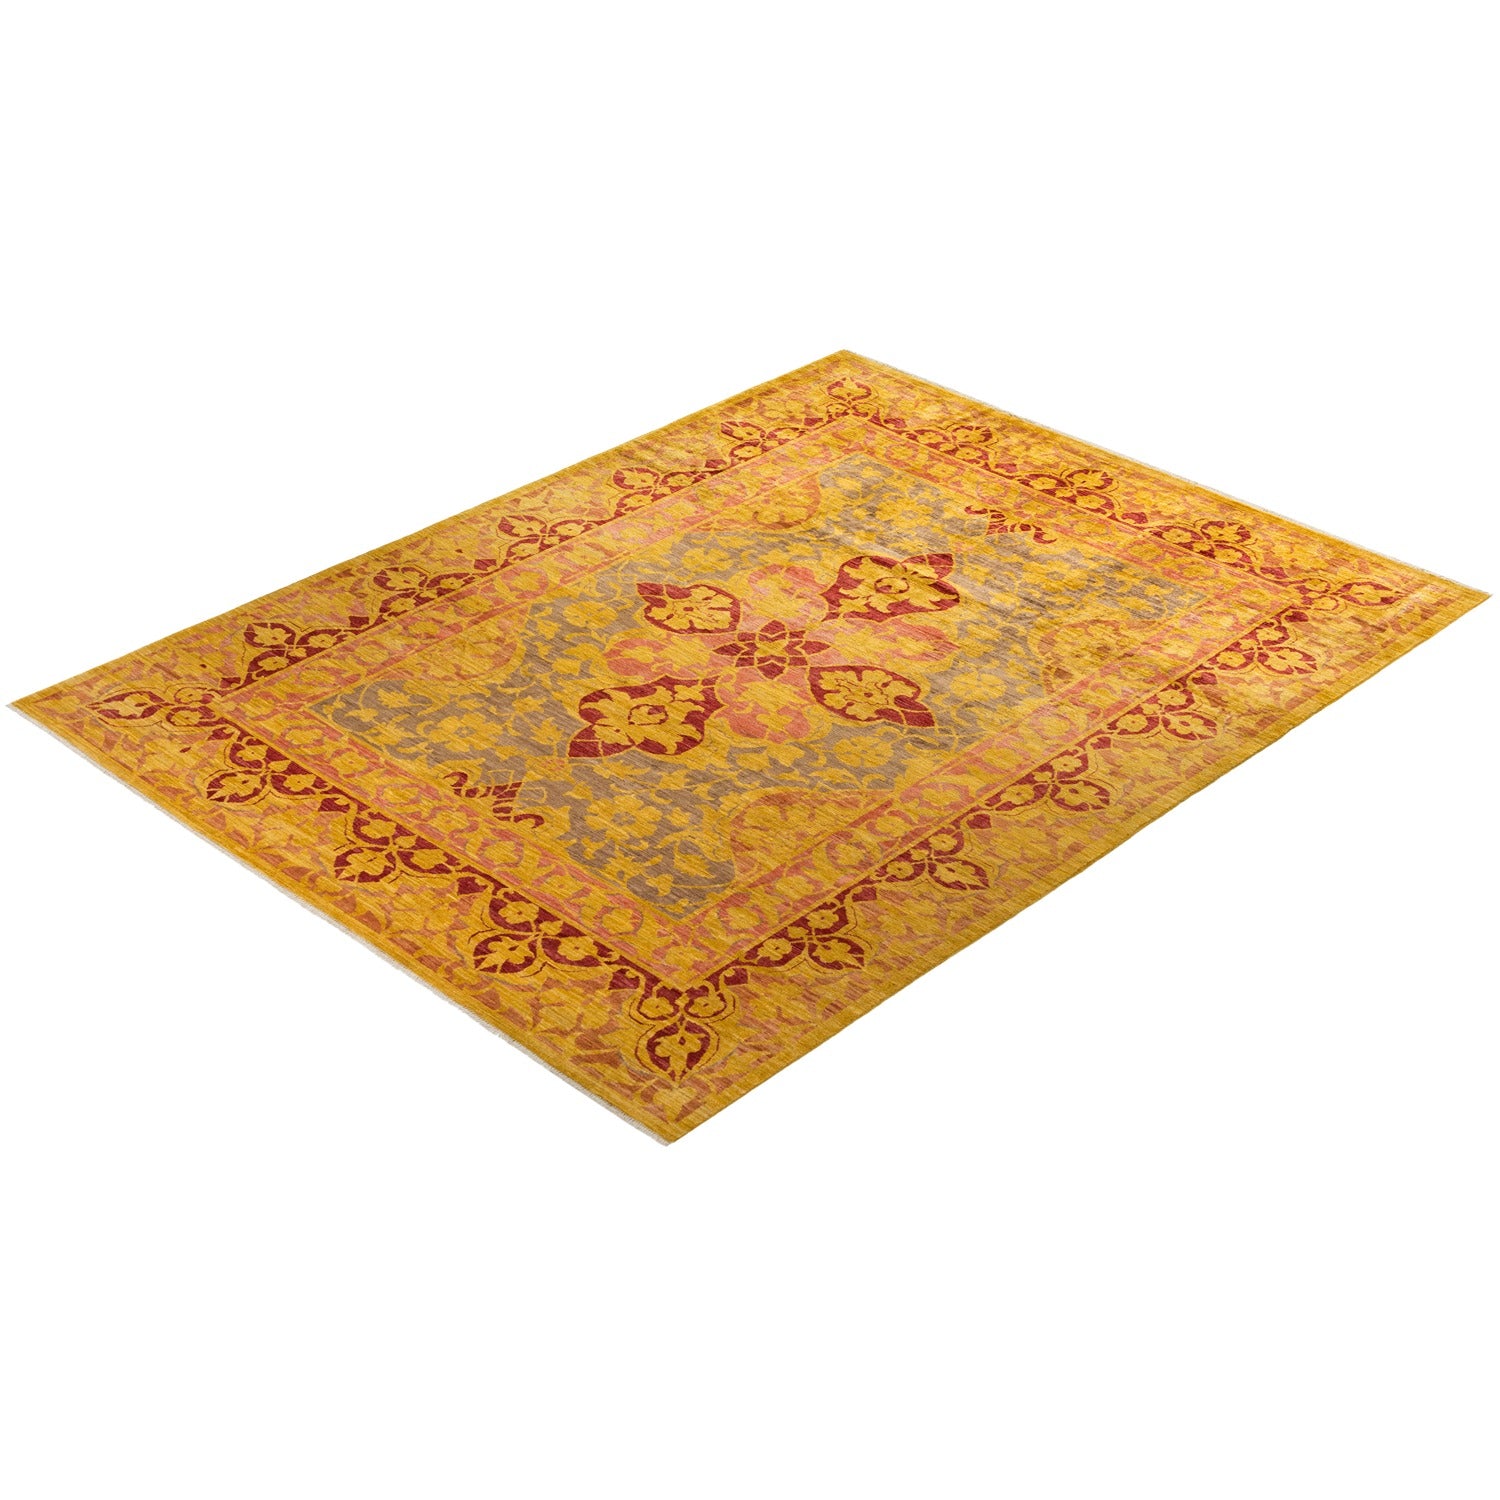 An opulent Persian-style rug with intricate floral motifs and rich colors.